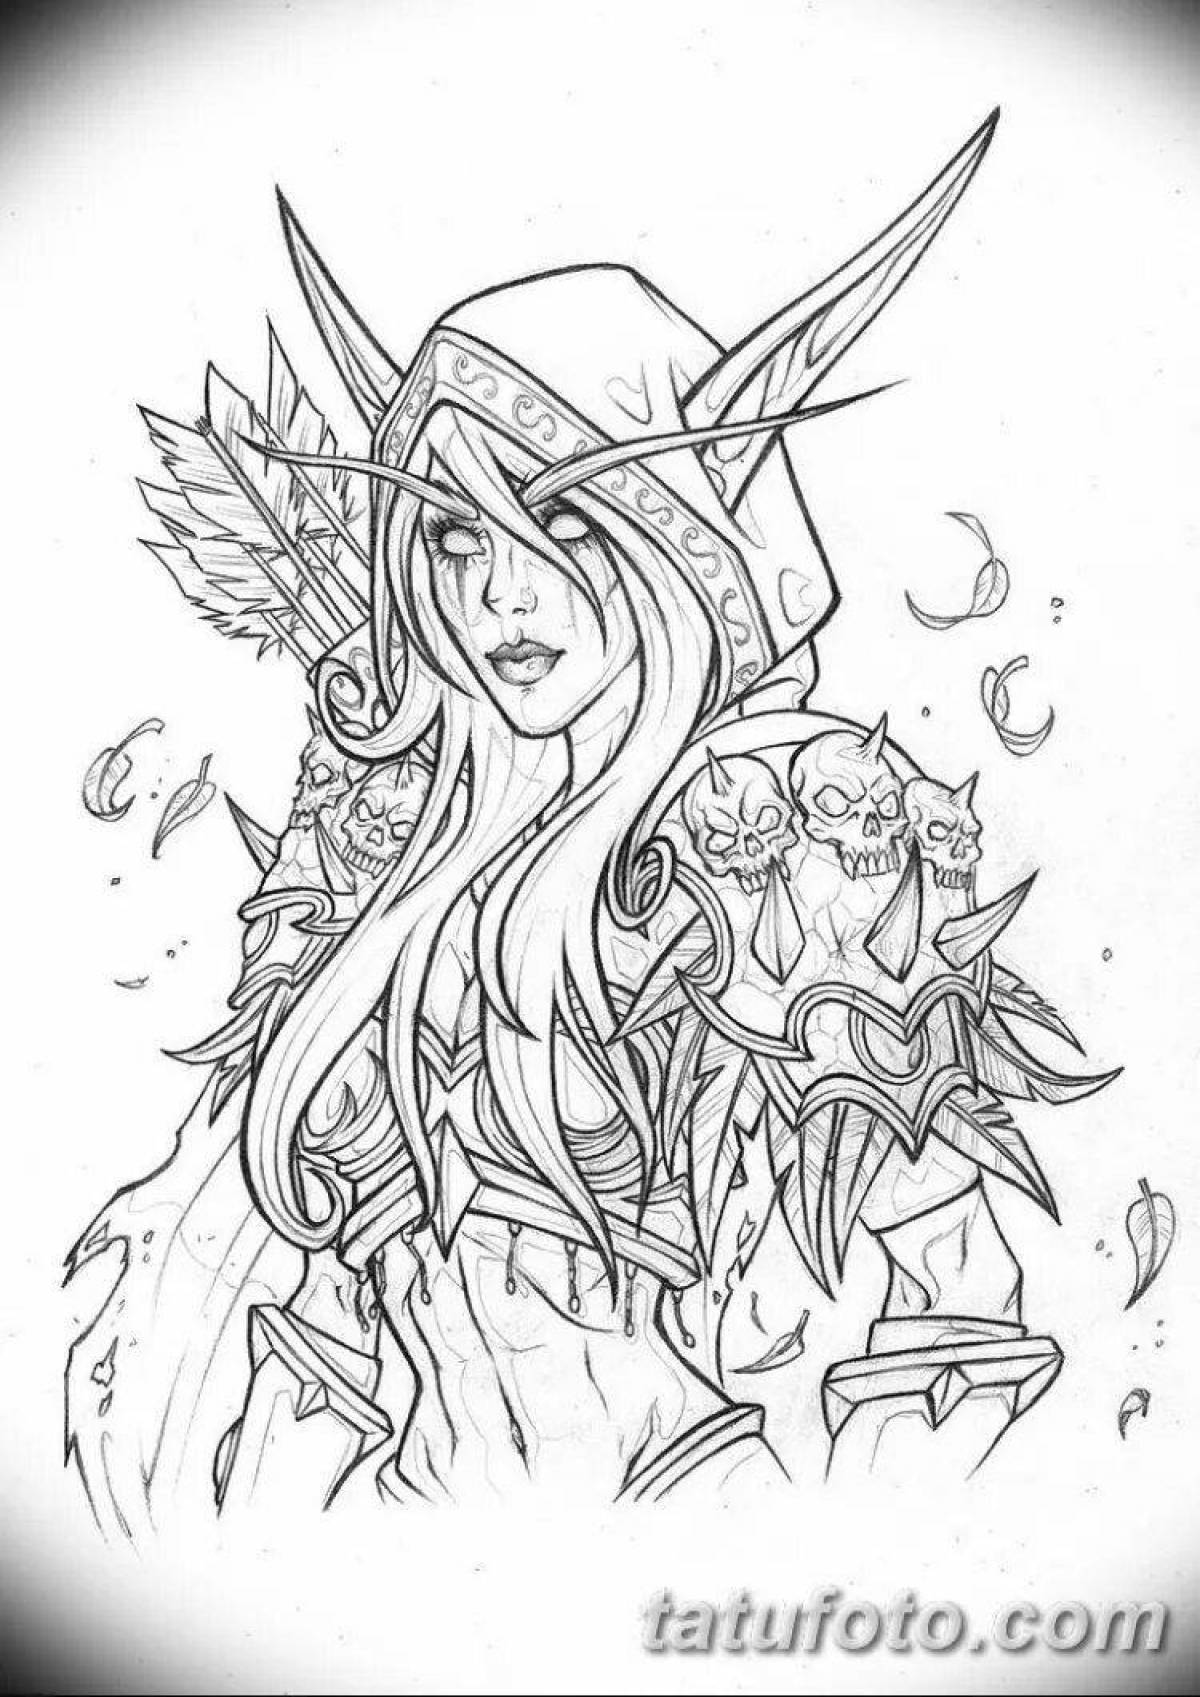 Colorful world of warcraft coloring page